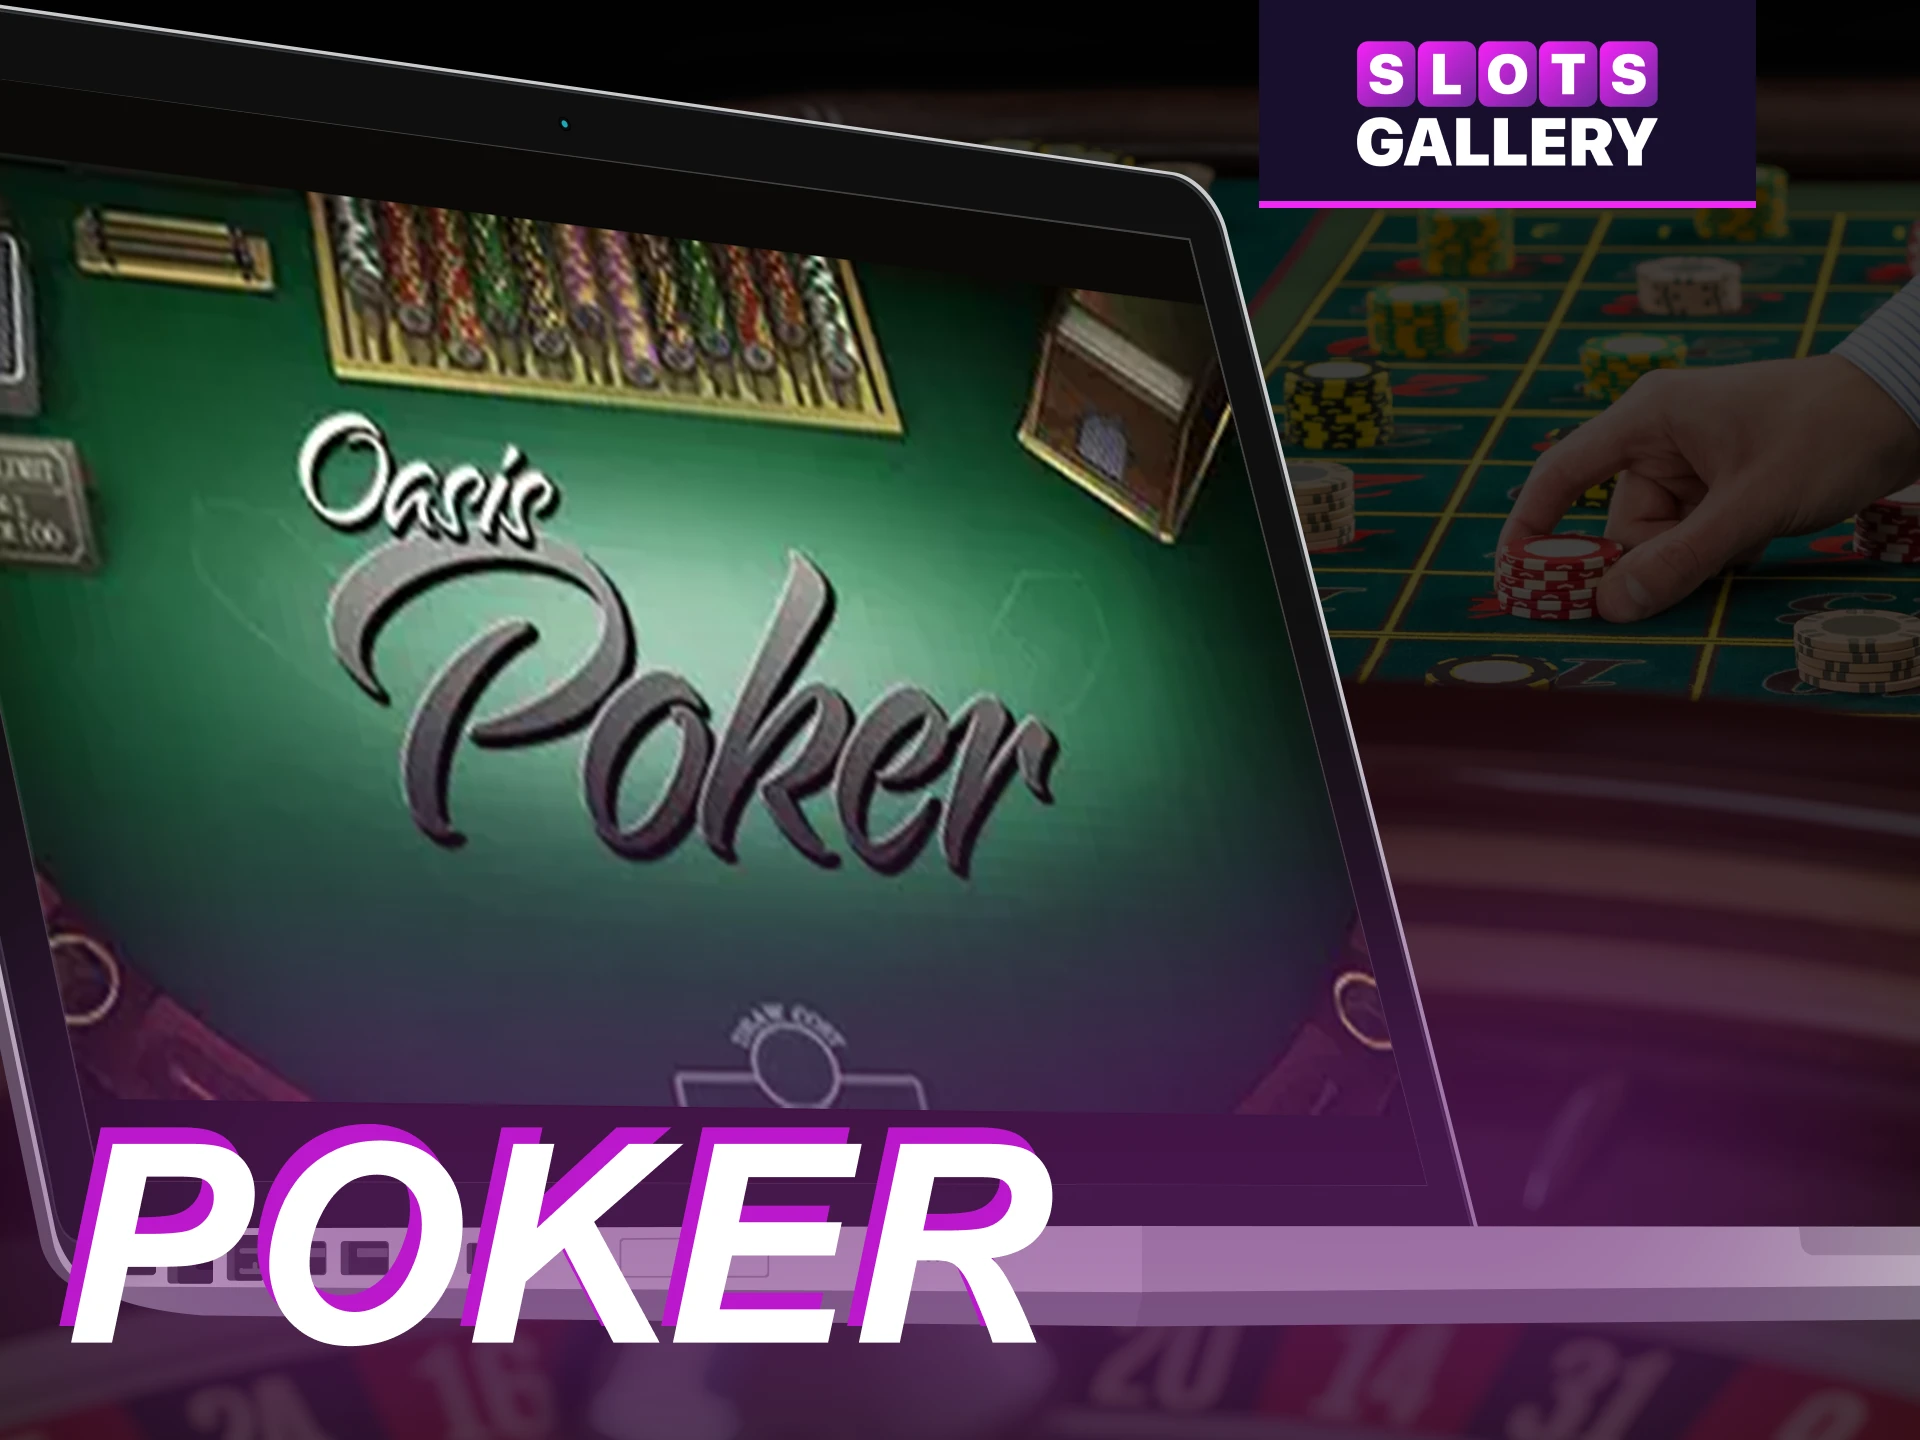 What is the purpose of the Poker game in the online casino Slots Gallery.